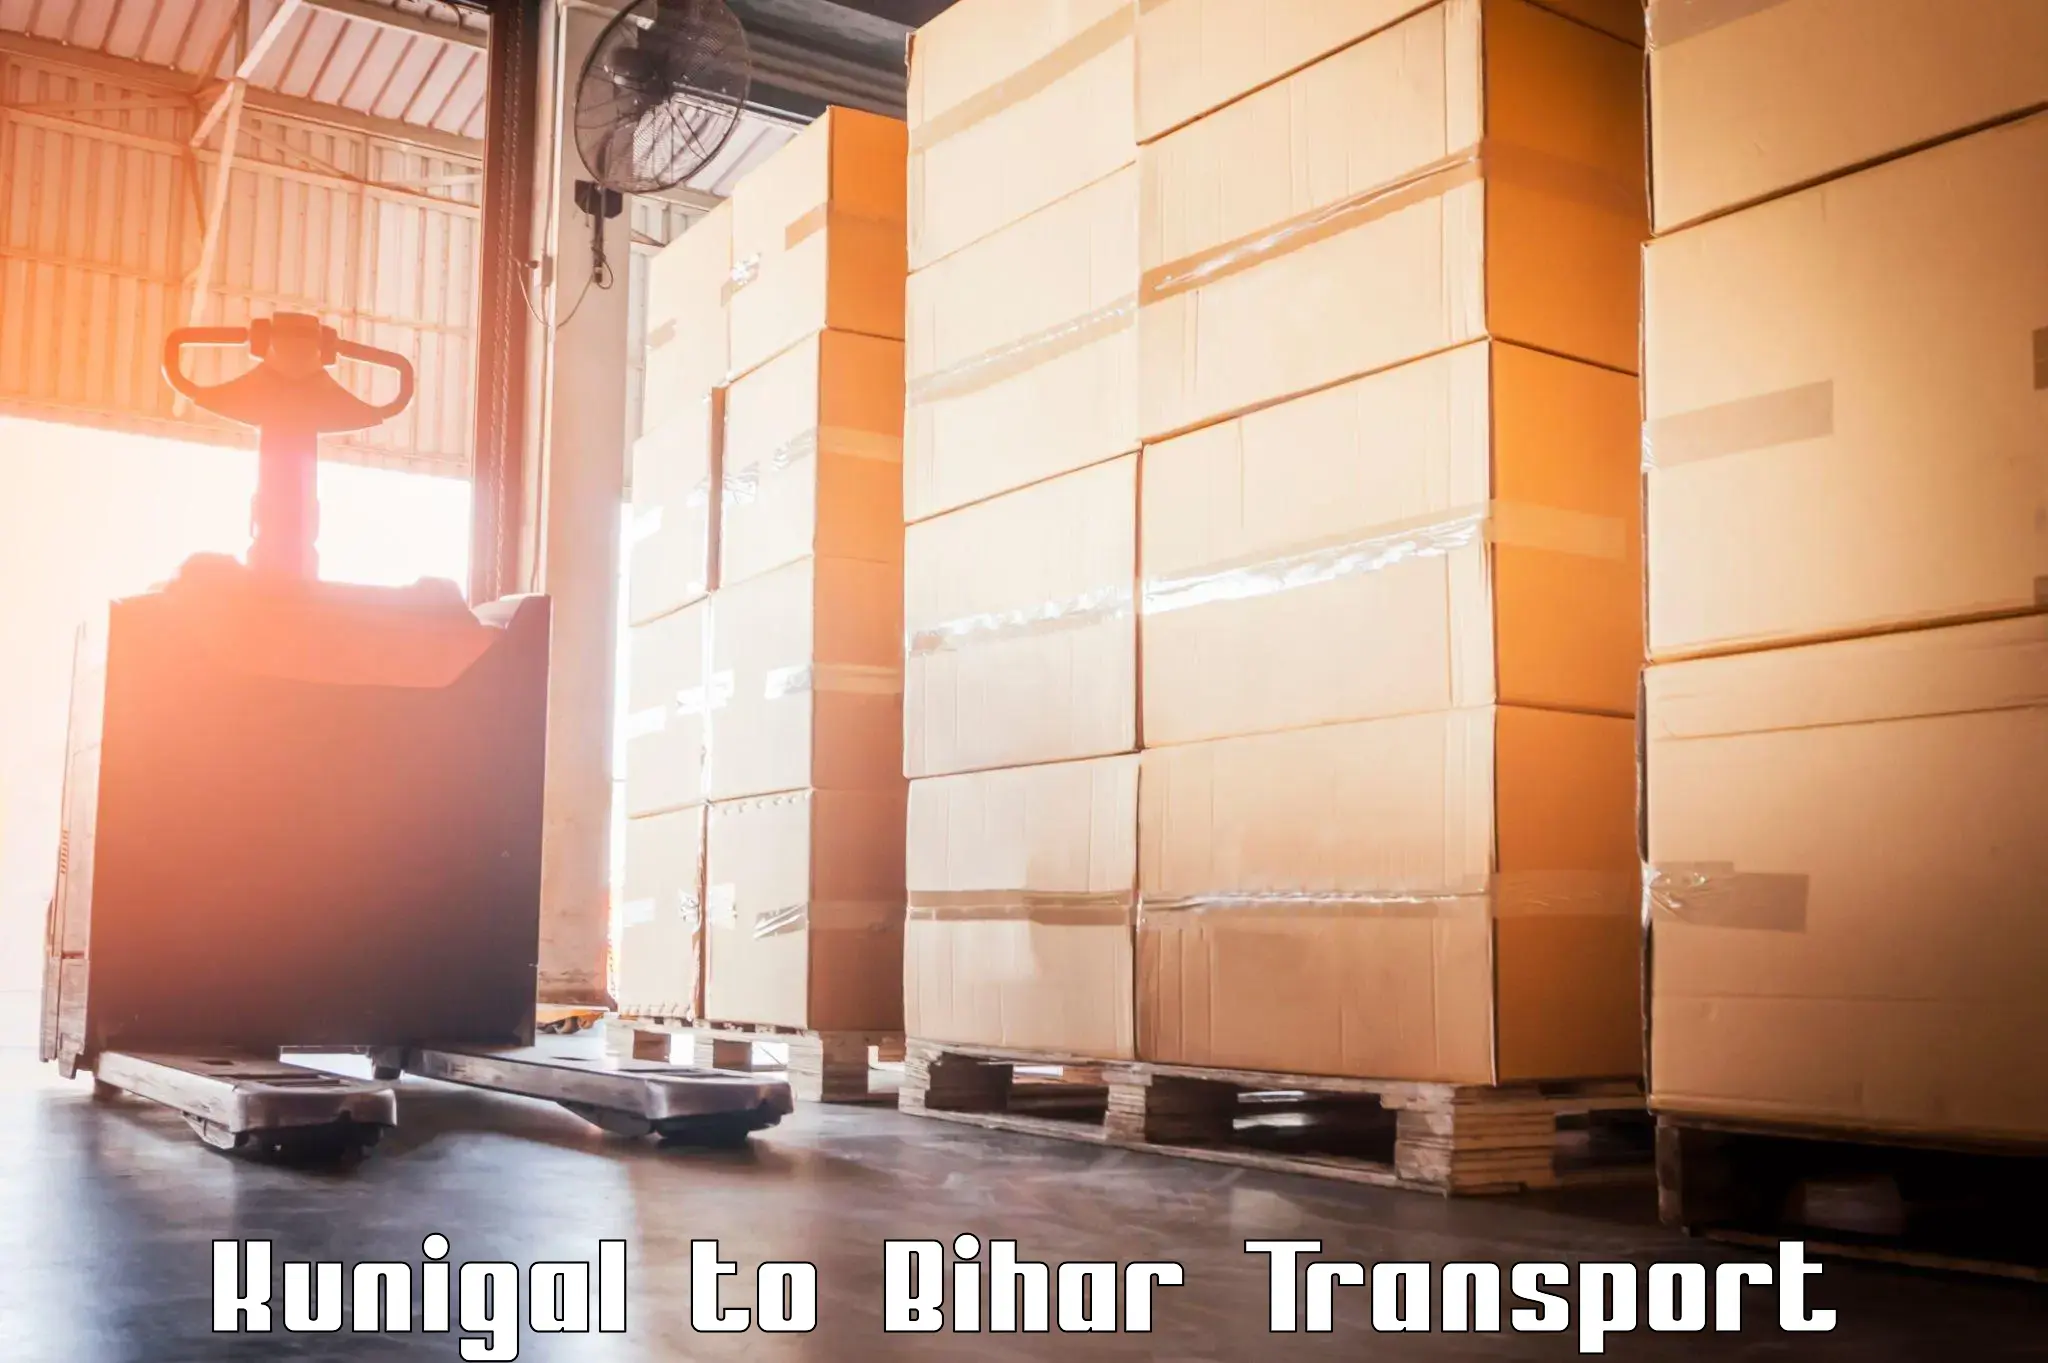 Daily parcel service transport Kunigal to Piro